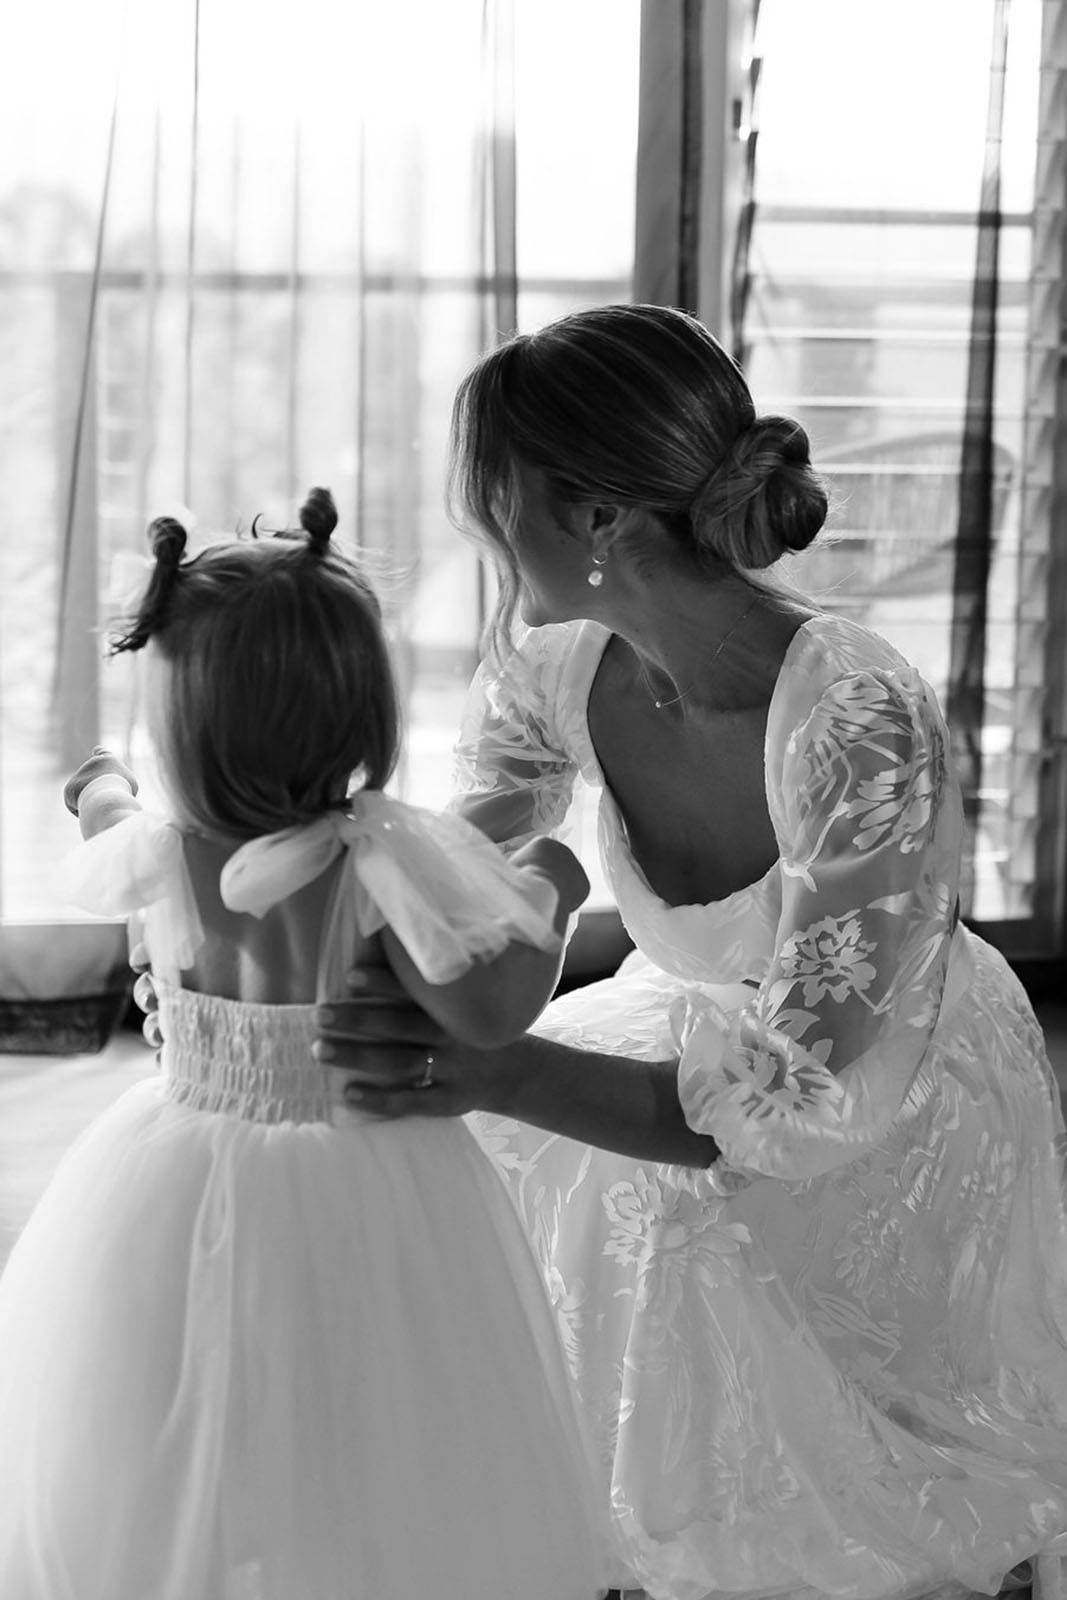 Bride and mini flower girl, sharing a cute moment